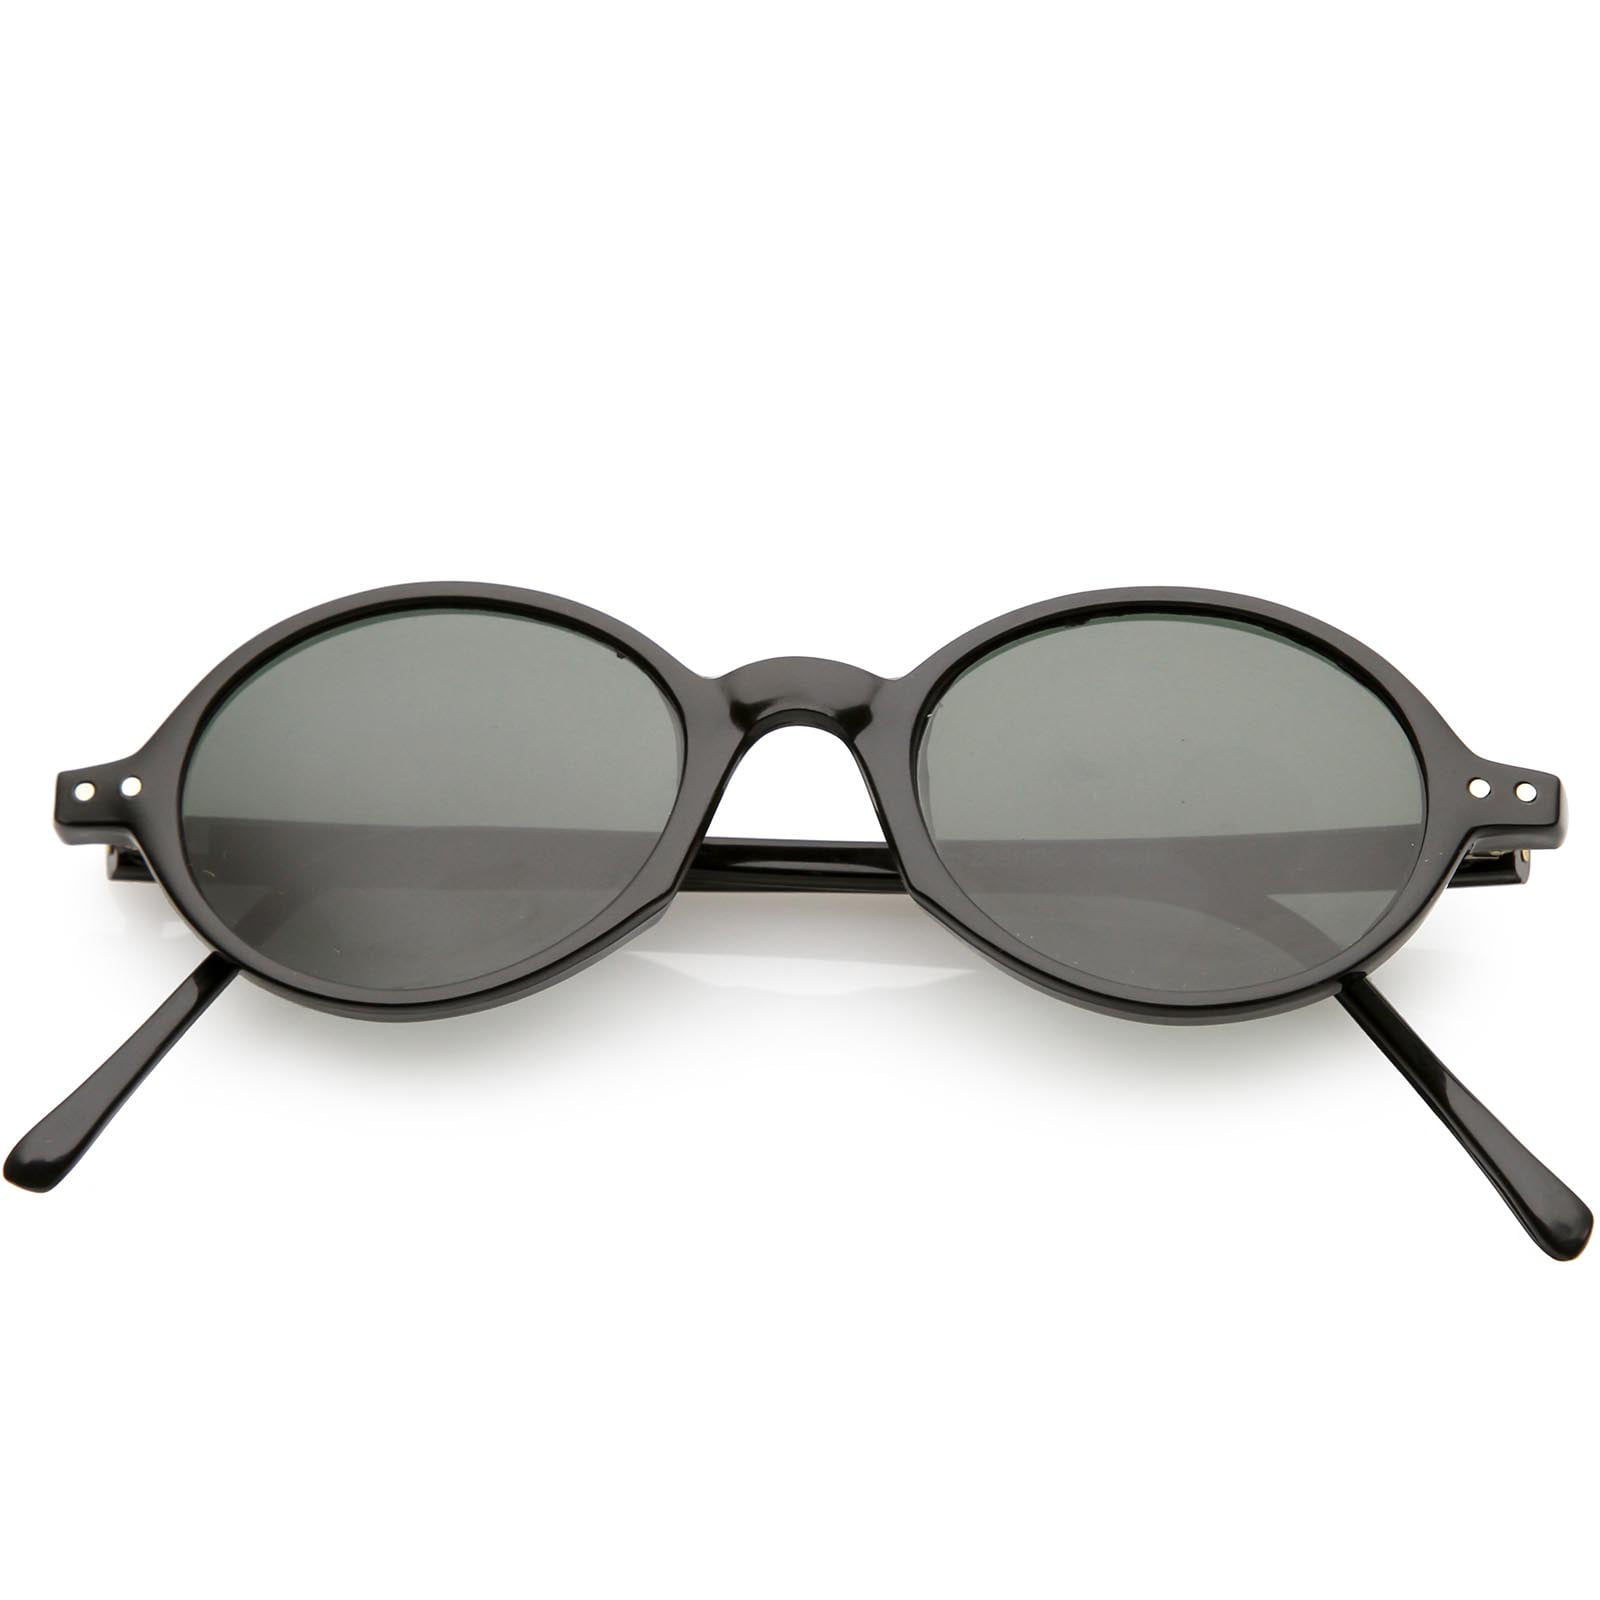 New 90's Vintage Style Black Dot Unisex Cool Sunglasses With Hand Polished Frame 